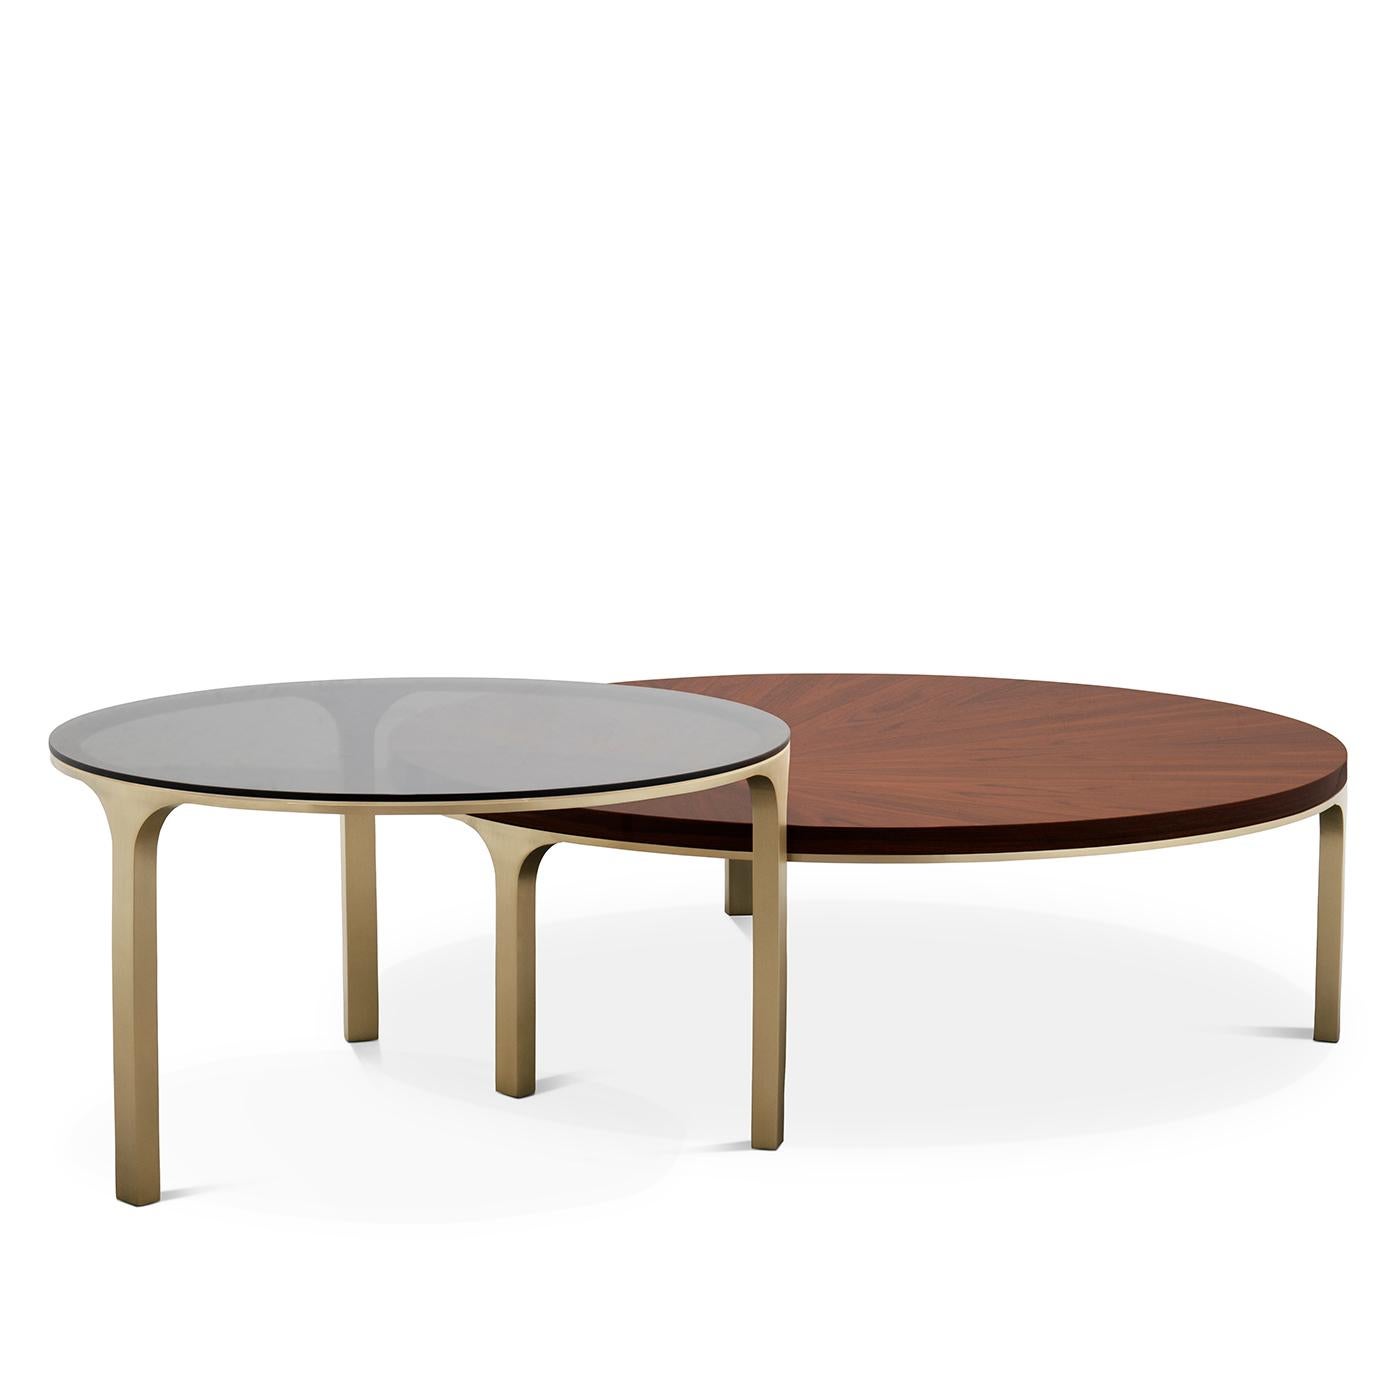 Coffee table step set of 2 with solid brass base 
In brushed finish. Medium side table is made with
A palisander veneered top and higher side table
Is made with a bronzed tempered glass top.